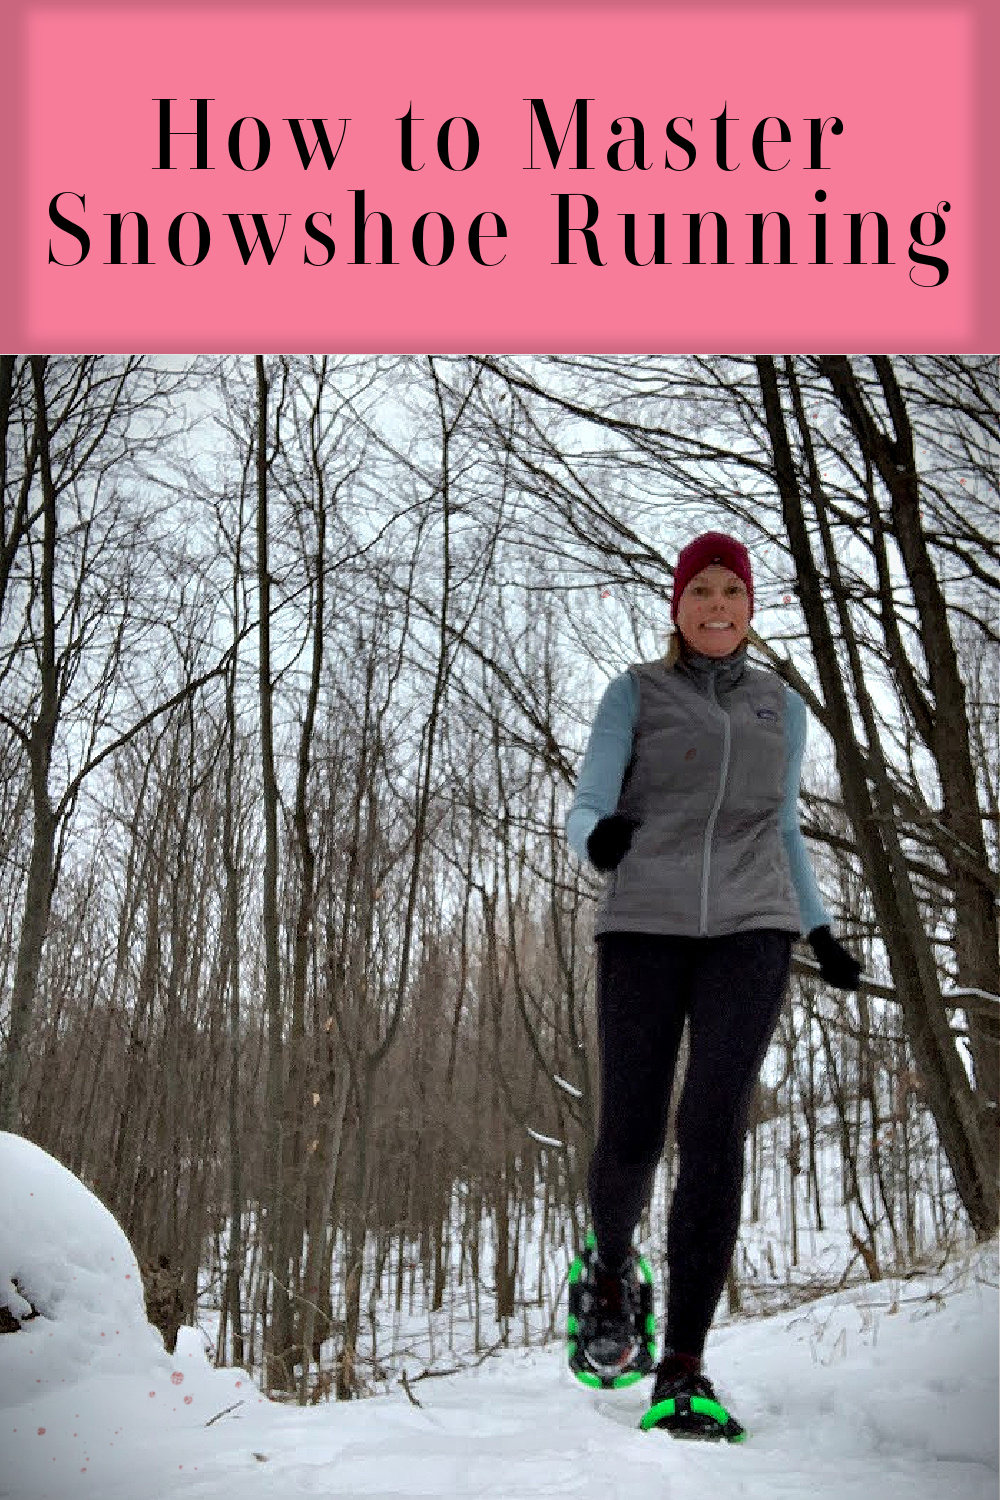 How to Master Snowshoe Running